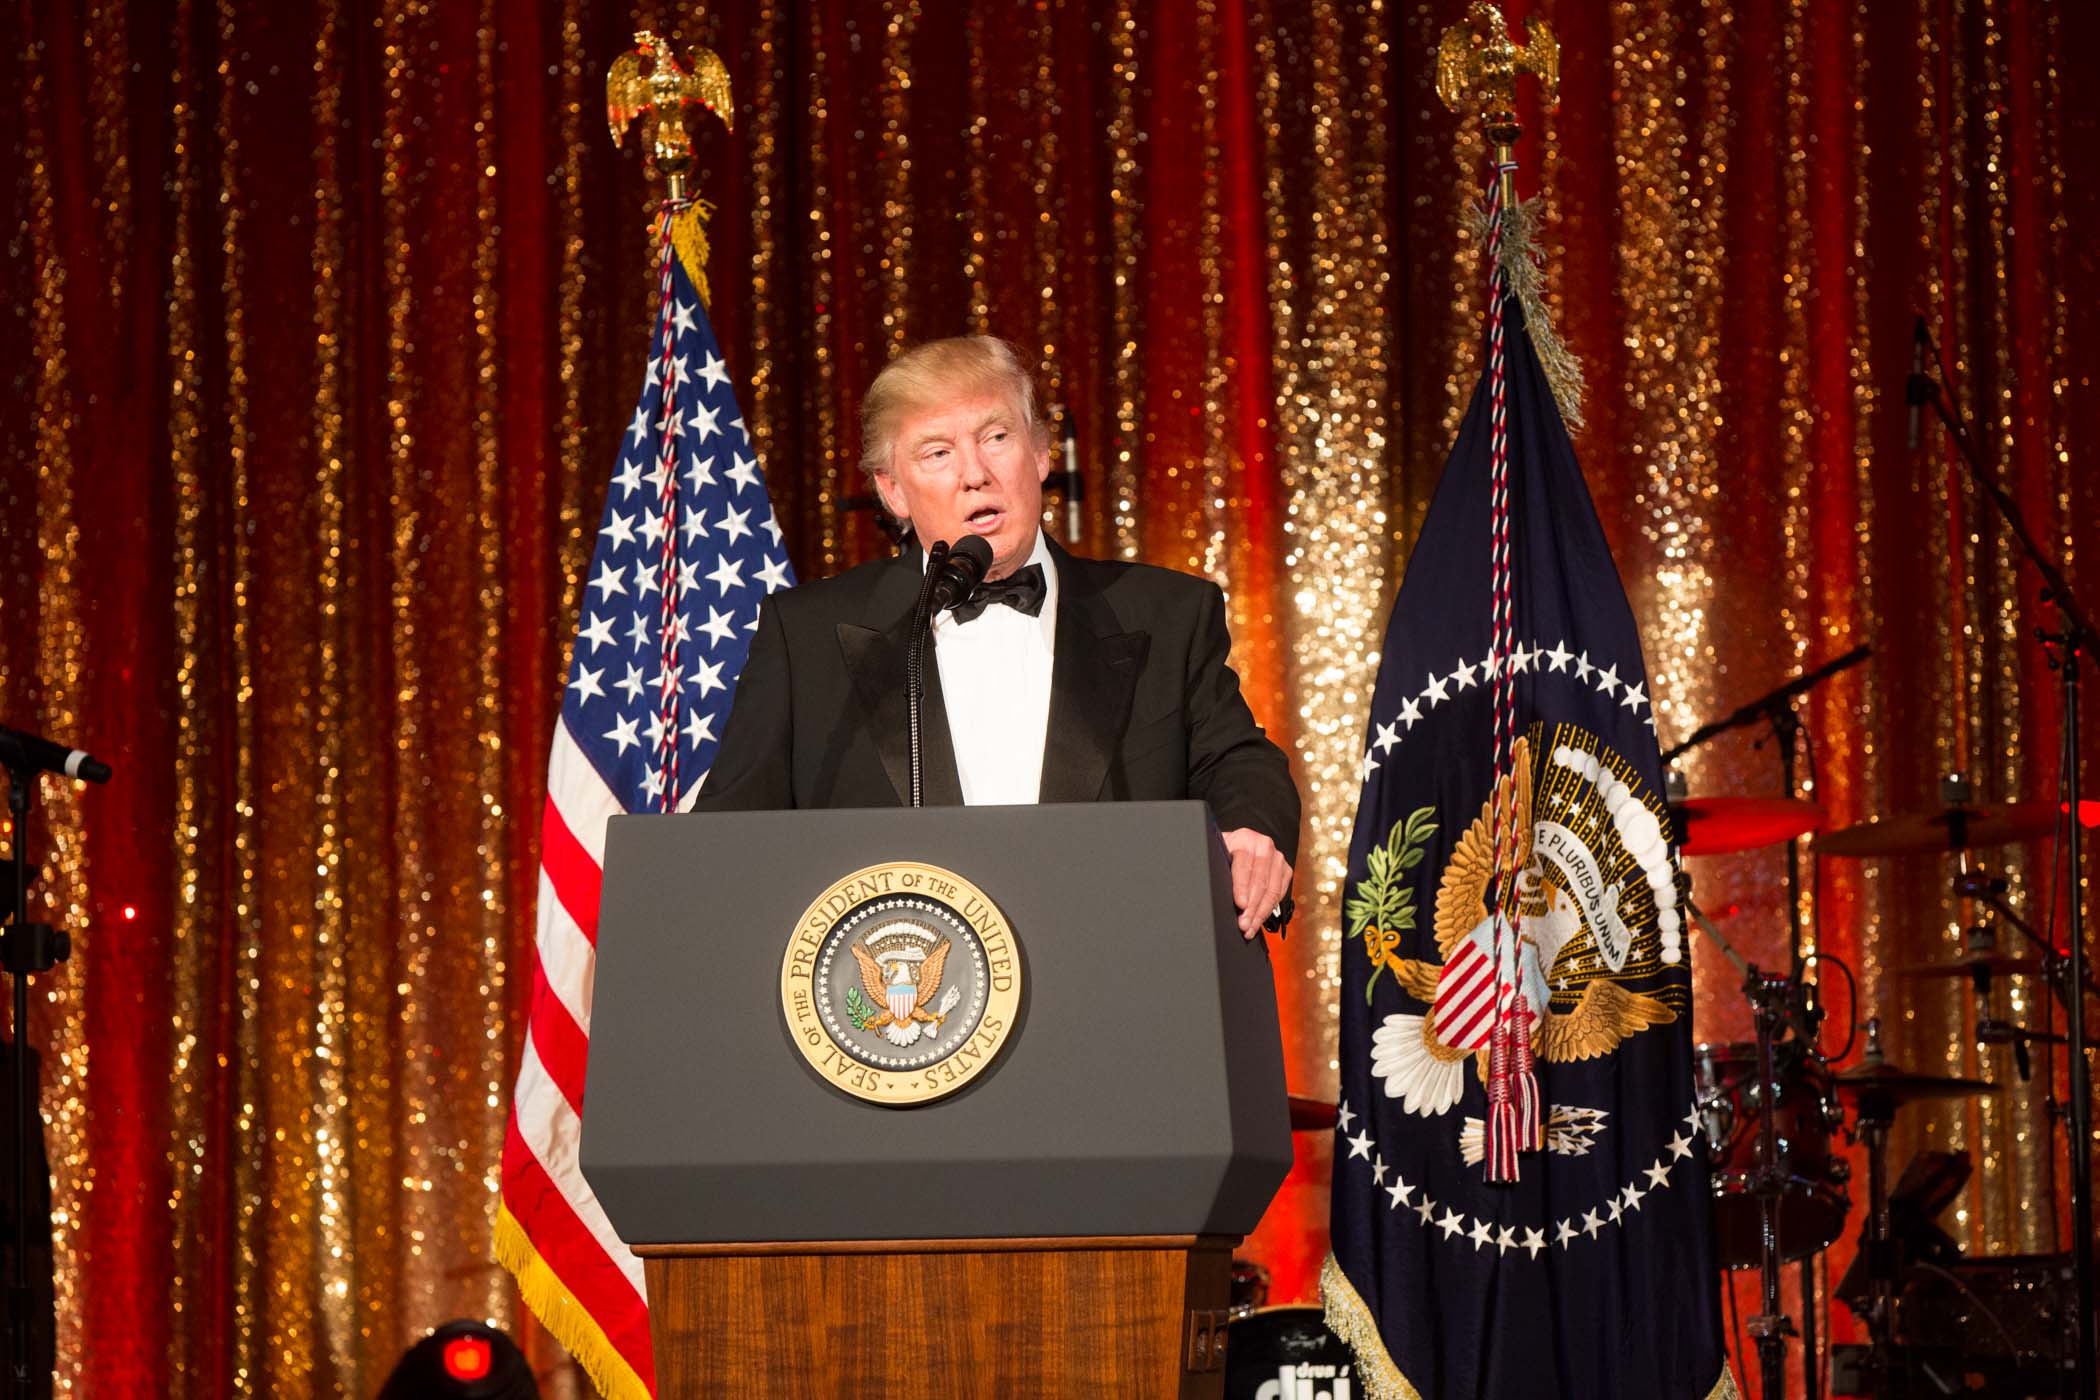 PHOTO: President Donald Trump speaks at the 60th International Red Cross Ball at Mar-a-lago on Feb. 4, 2017.